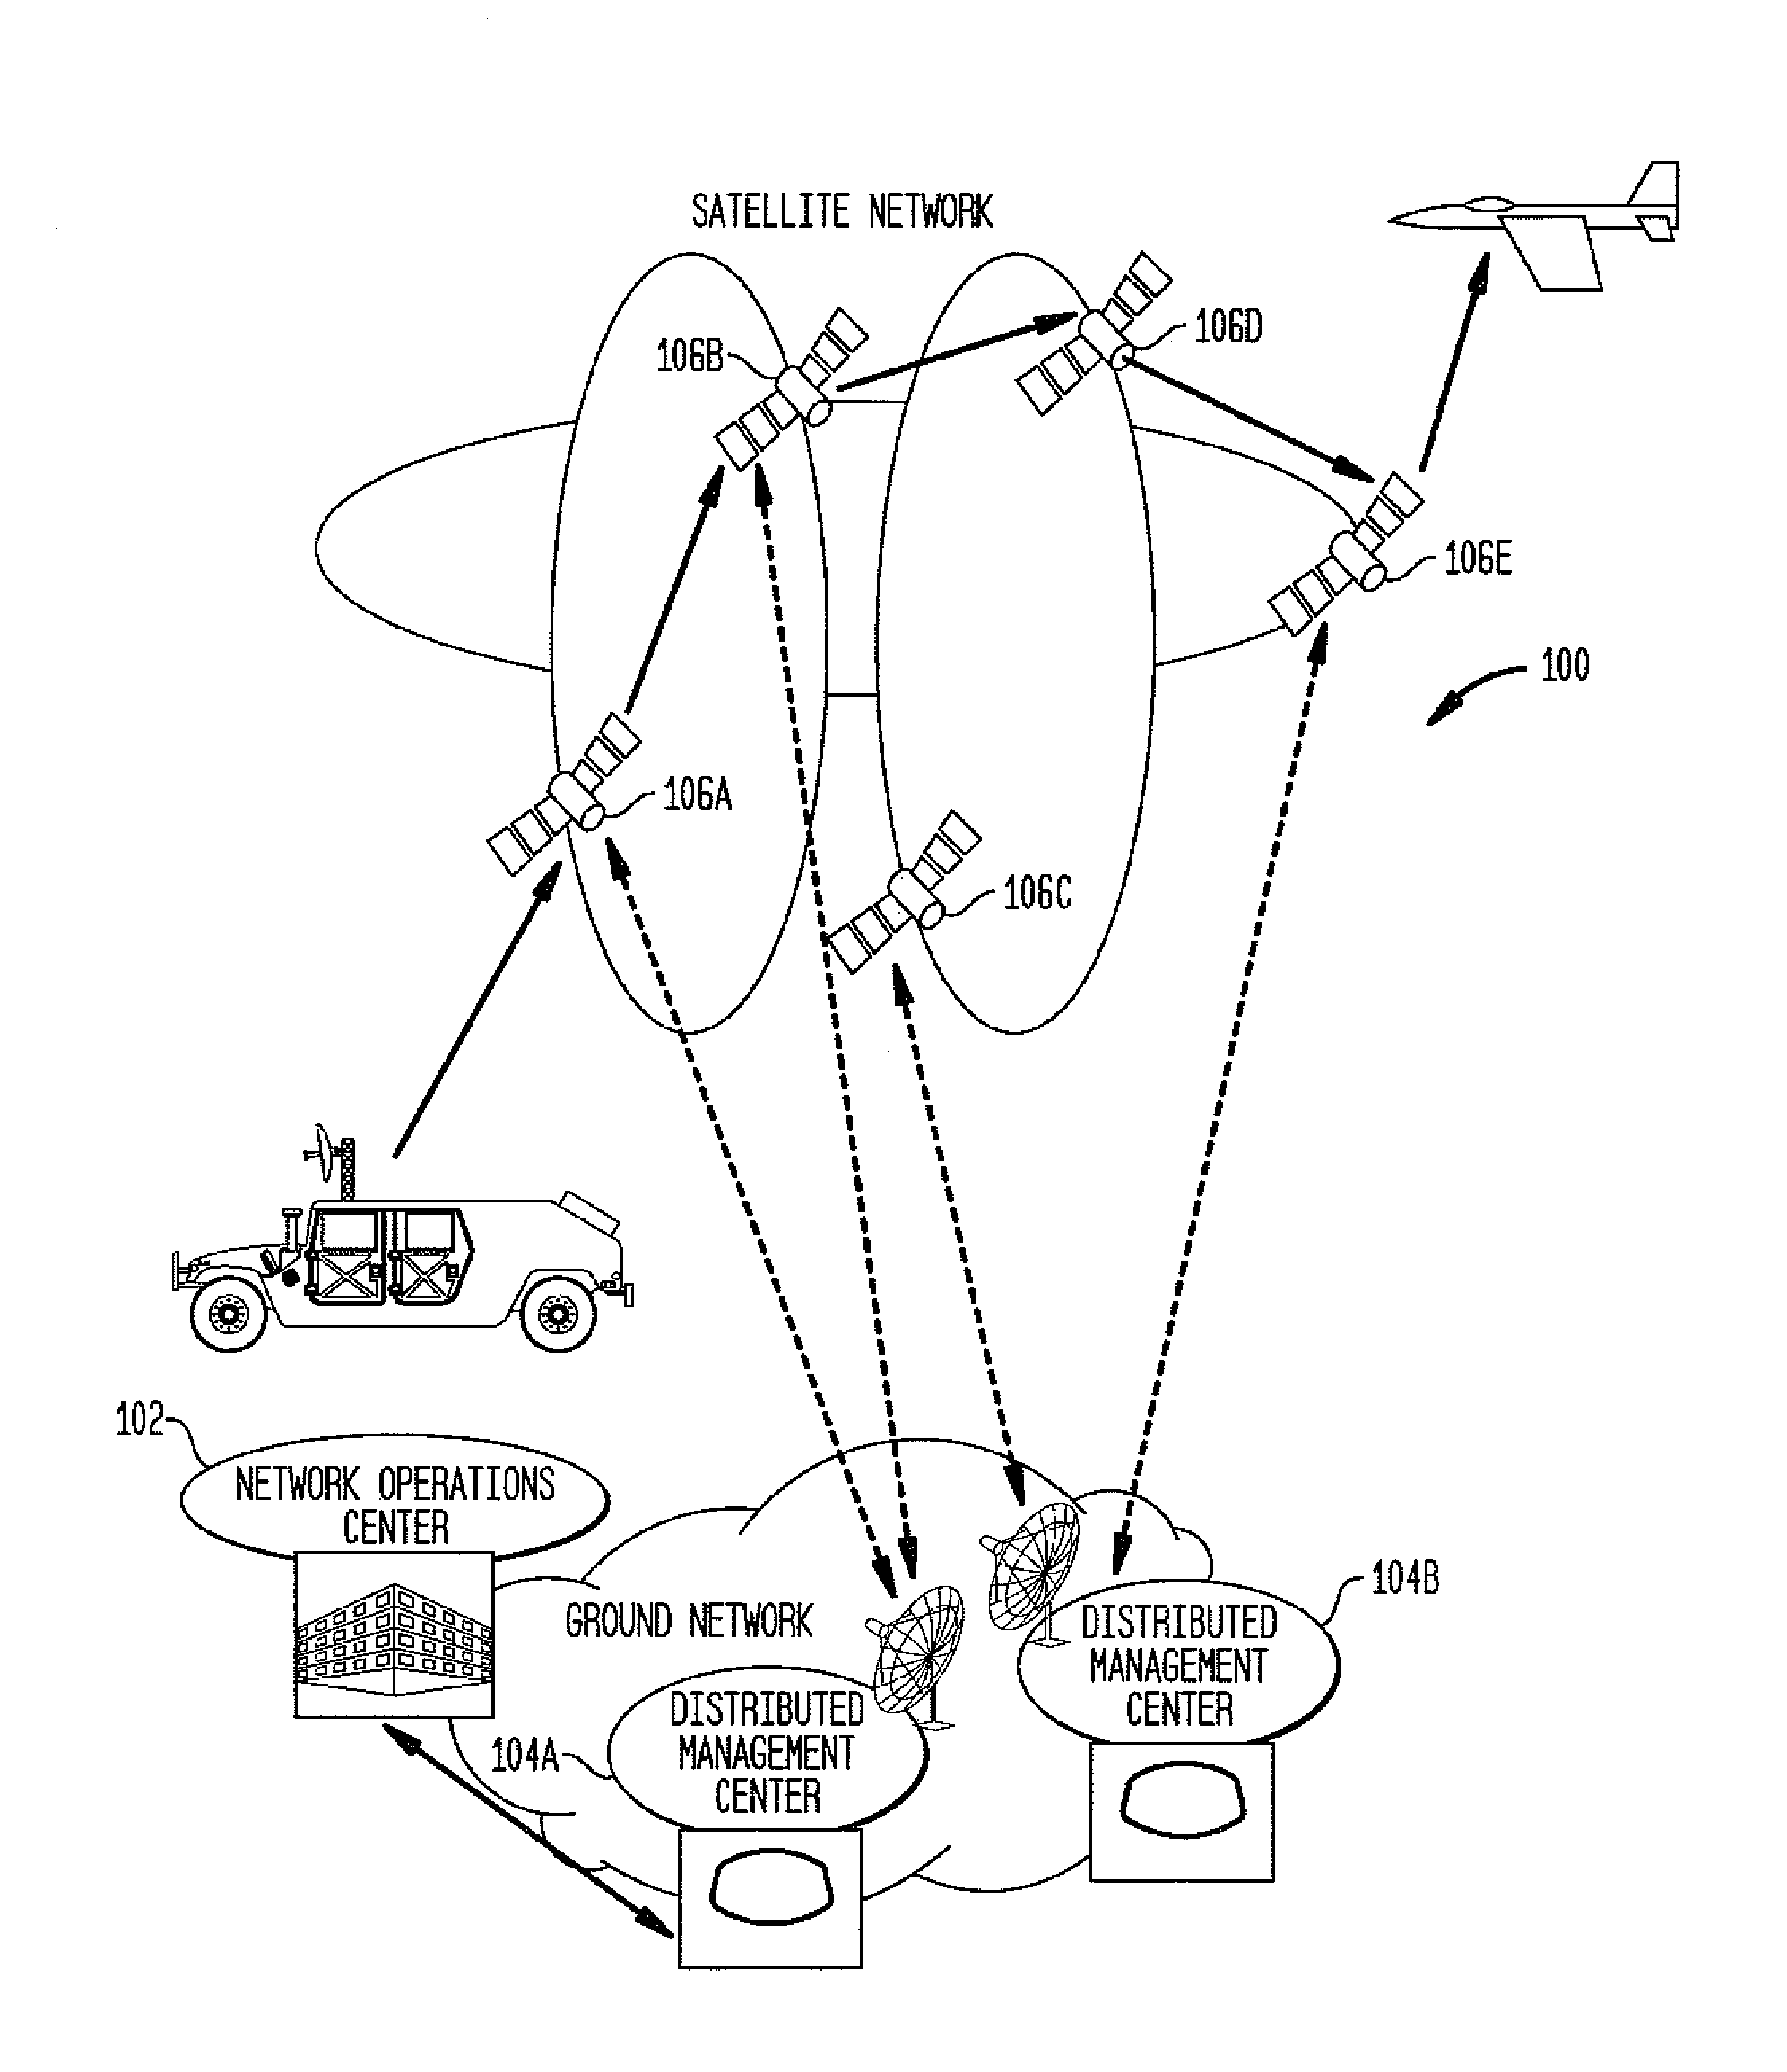 Method and system for determination of routes in LEO satellite networks with bandwidth and priority awareness and adaptive rerouting